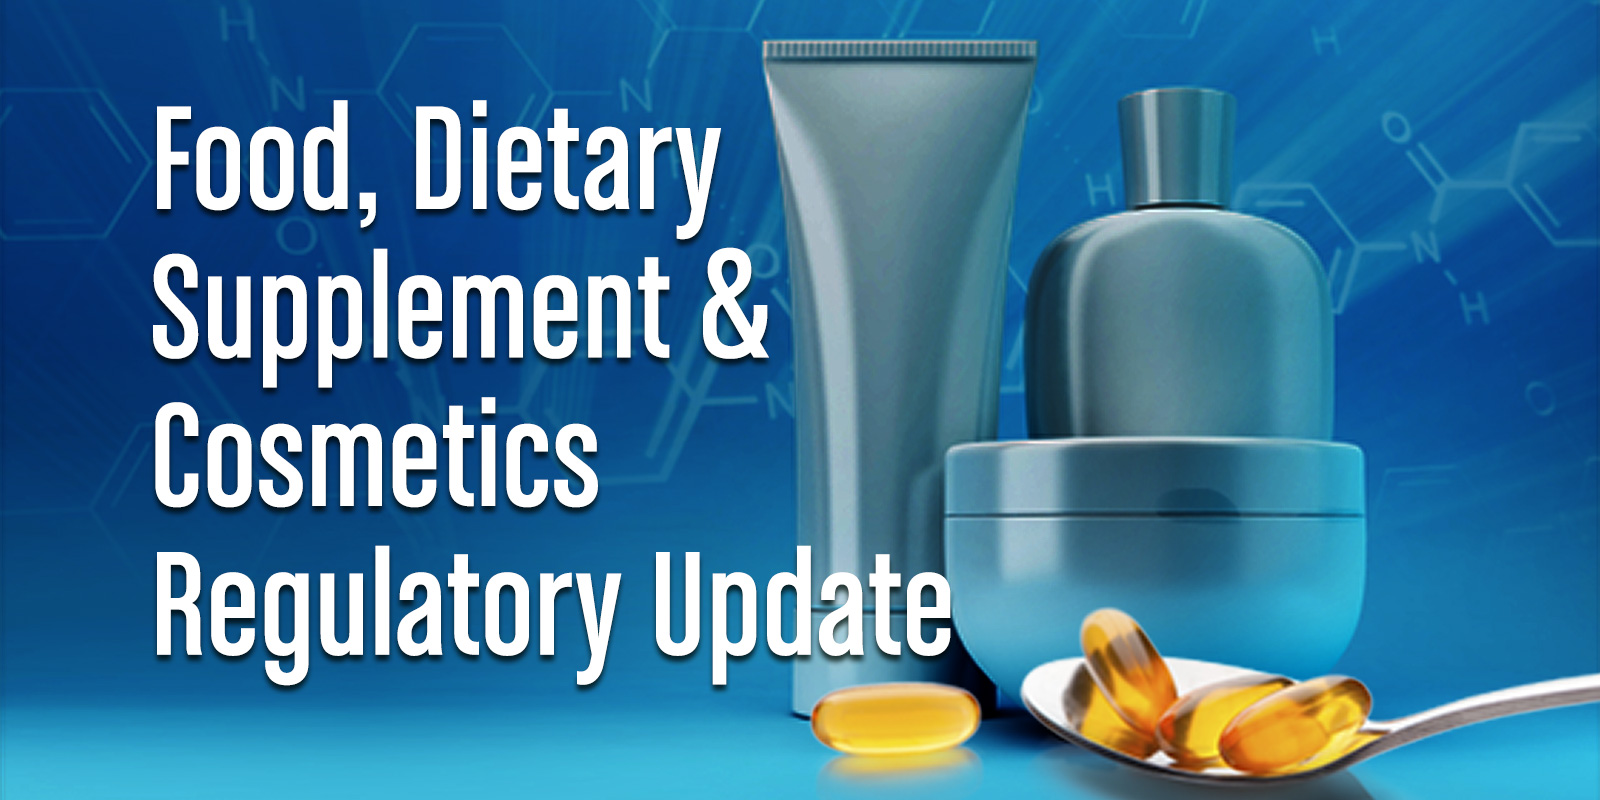 Food, Dietary Supplement & Cosmetics Update | Vol. IV, Issue 7